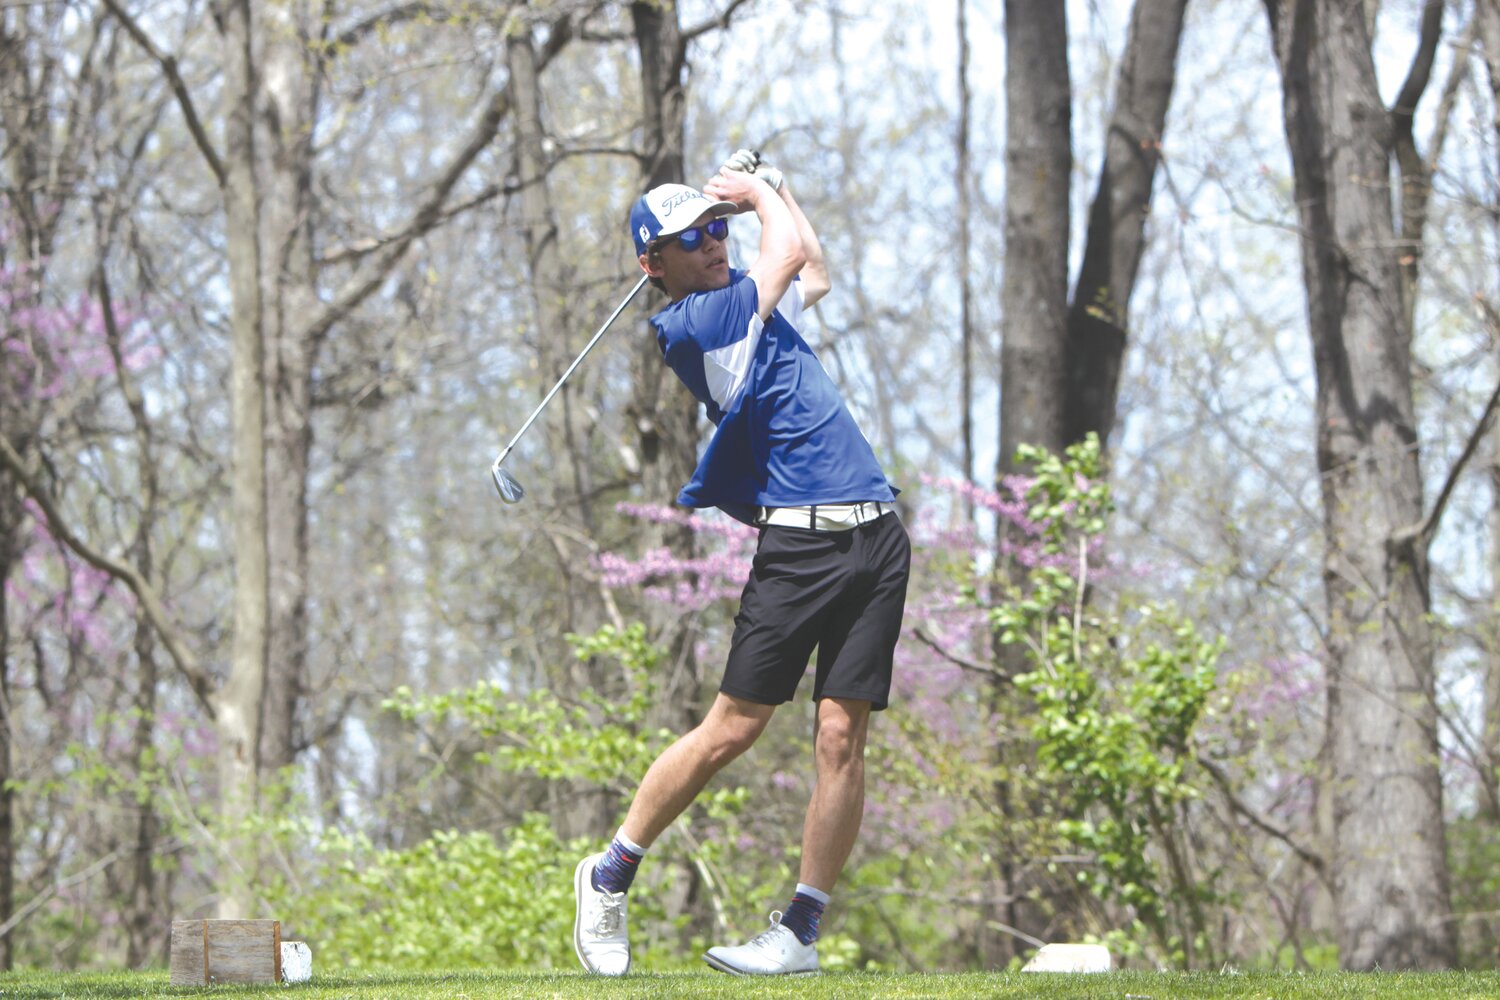 Montgomery County junior Robby Rodgers tees off at the Warrenton Invitational on April 13. He earned first-team all-Eastern Missouri Conference honors this season.